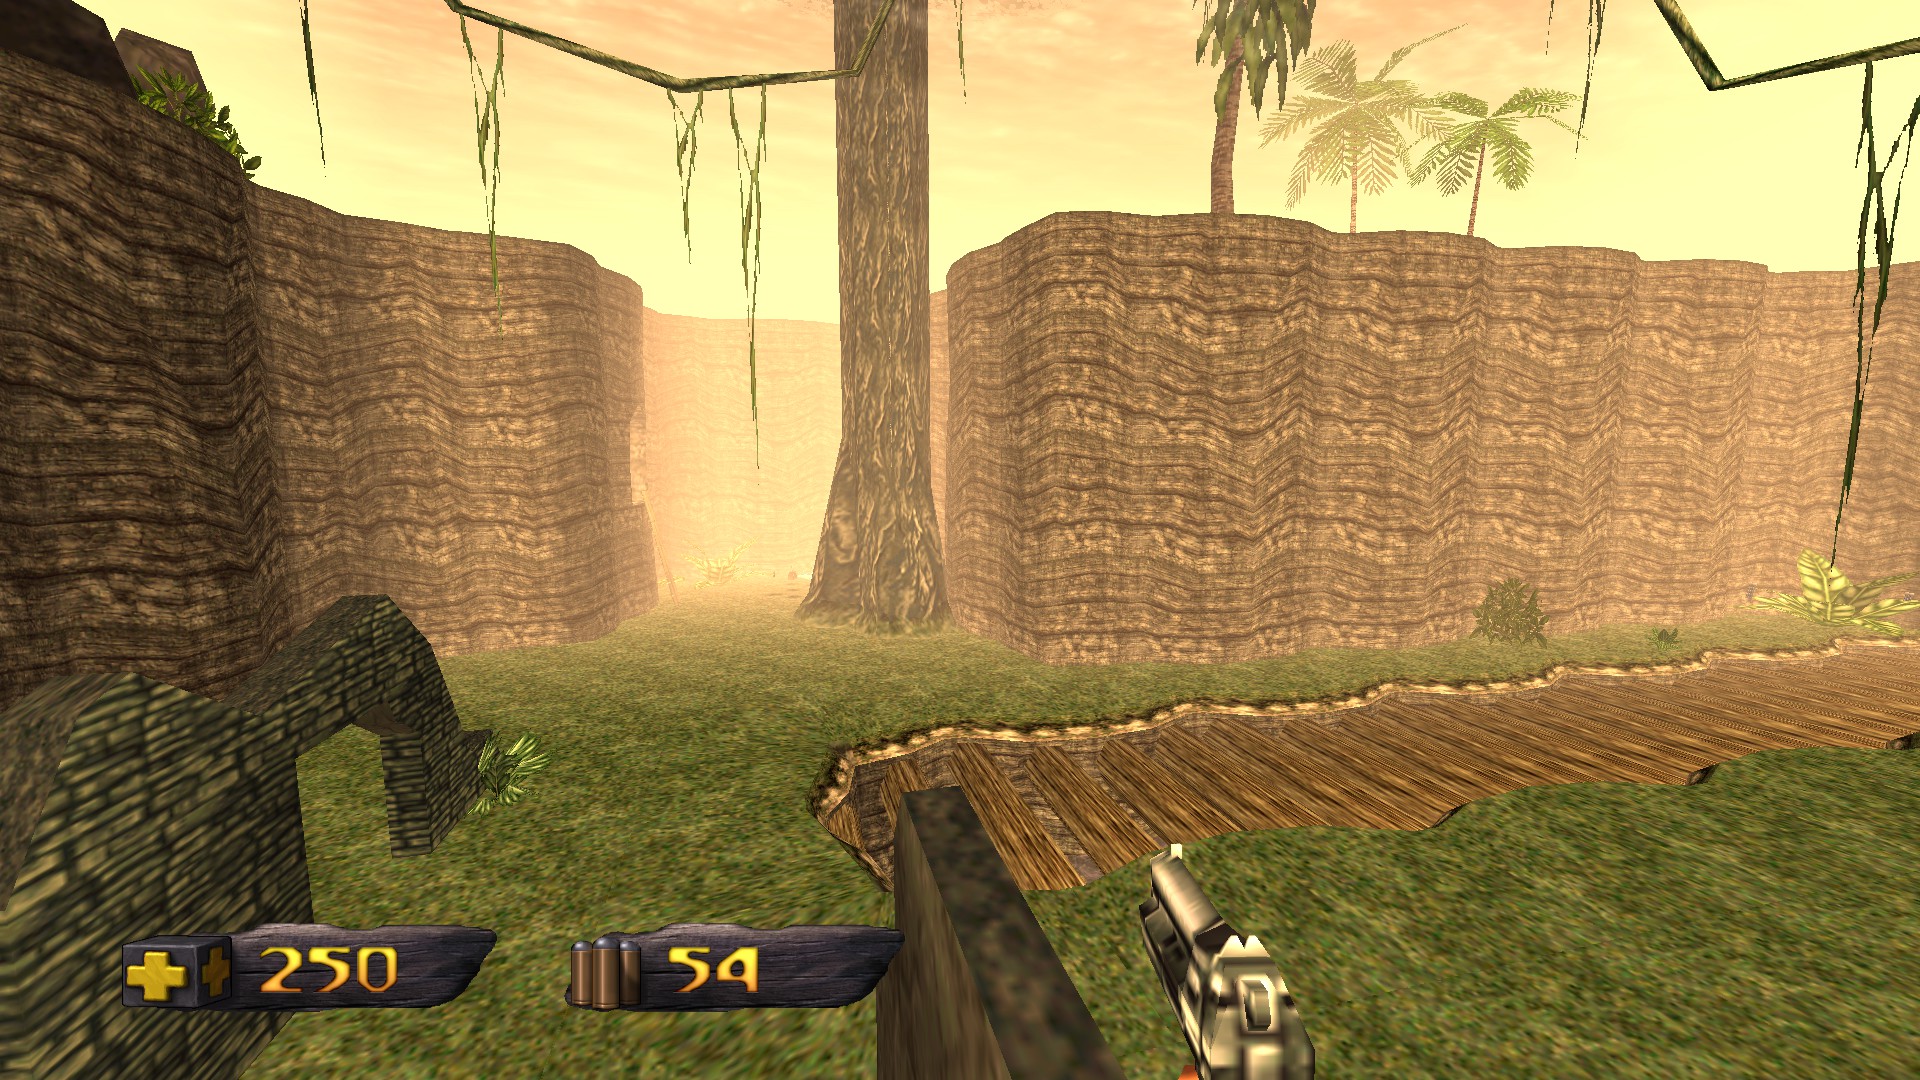 In-game screenshot of the jungle forest level.